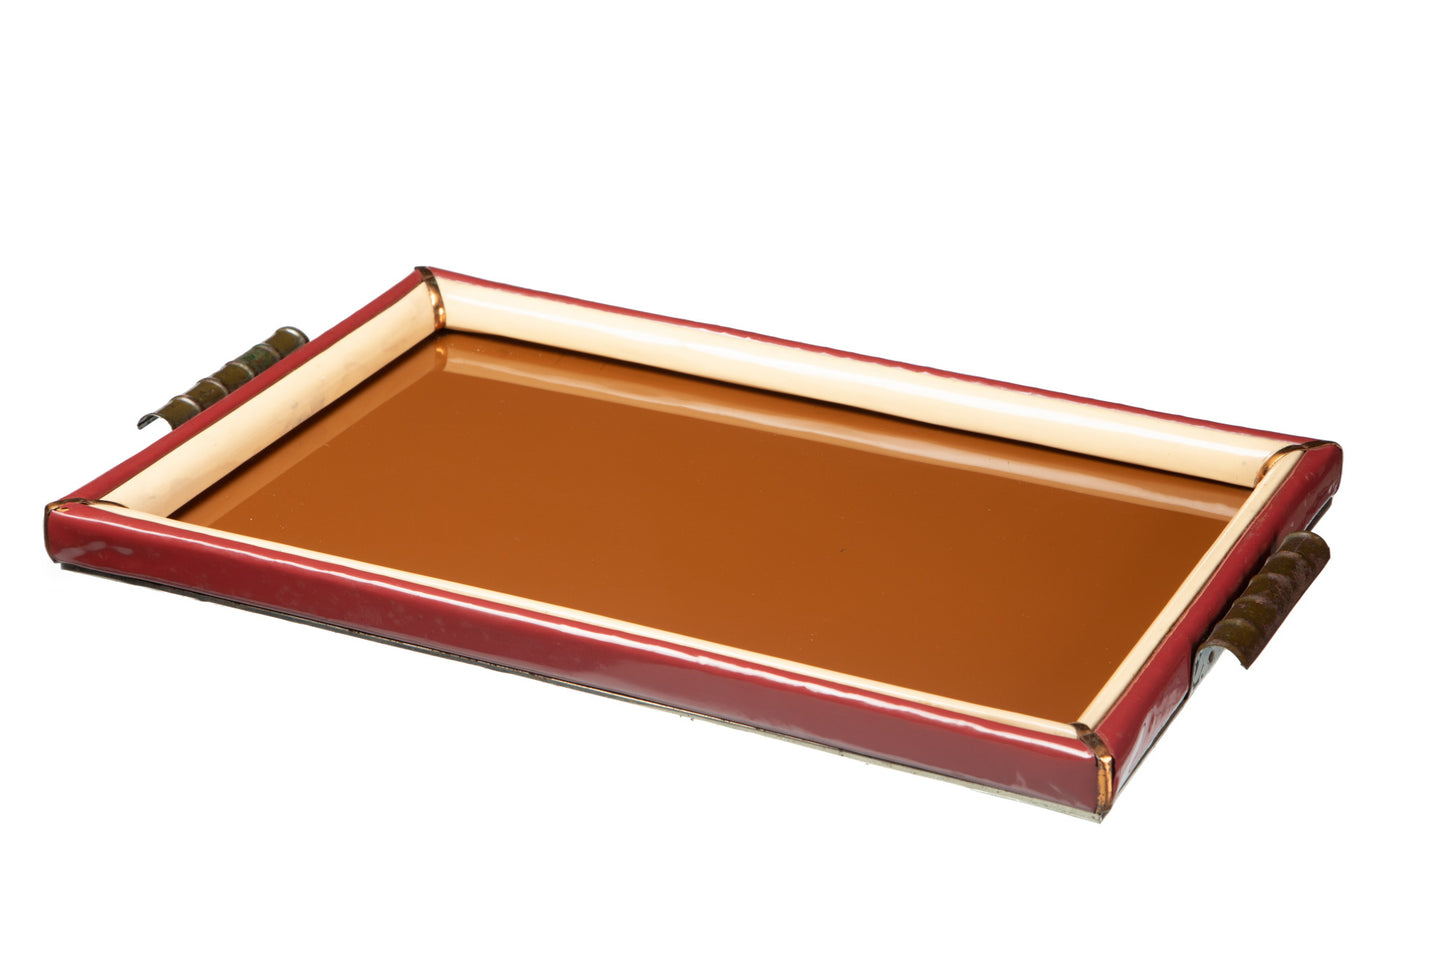 Ivory and red lacquered tray from the 70s